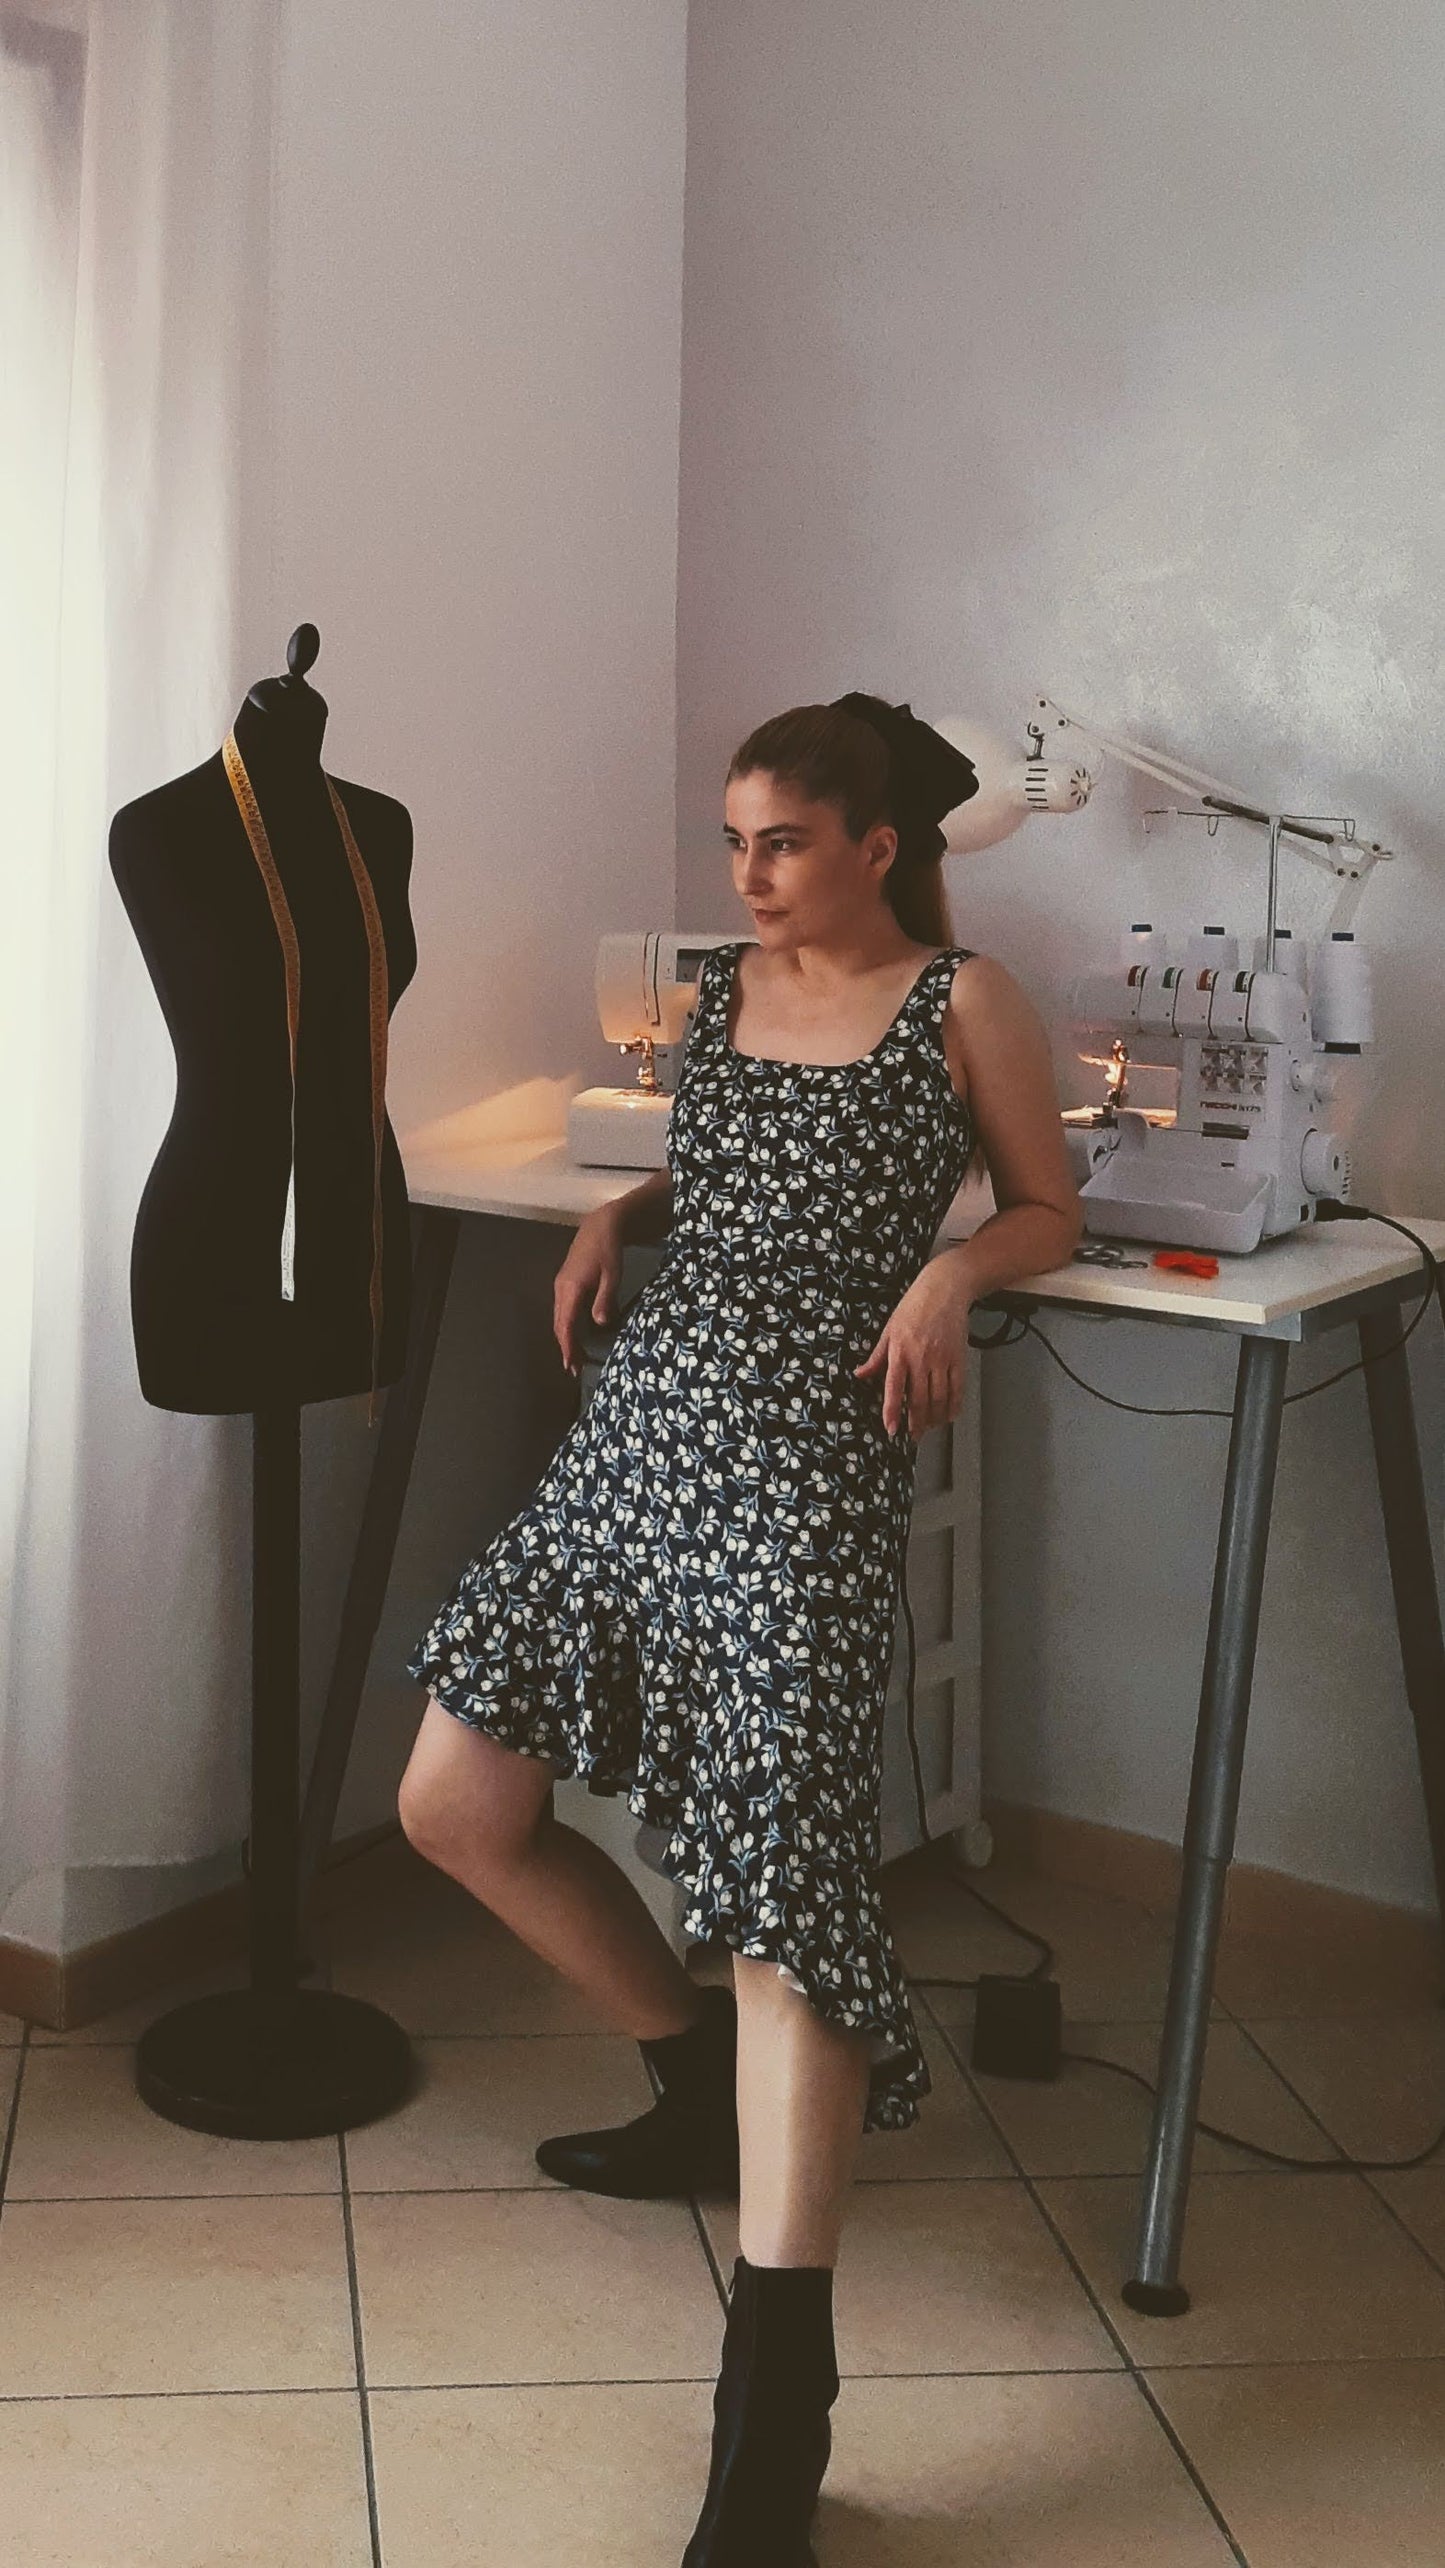 A woman in a patterned dress poses beside a tailoring mannequin amidst sewing machines on a table in the background.